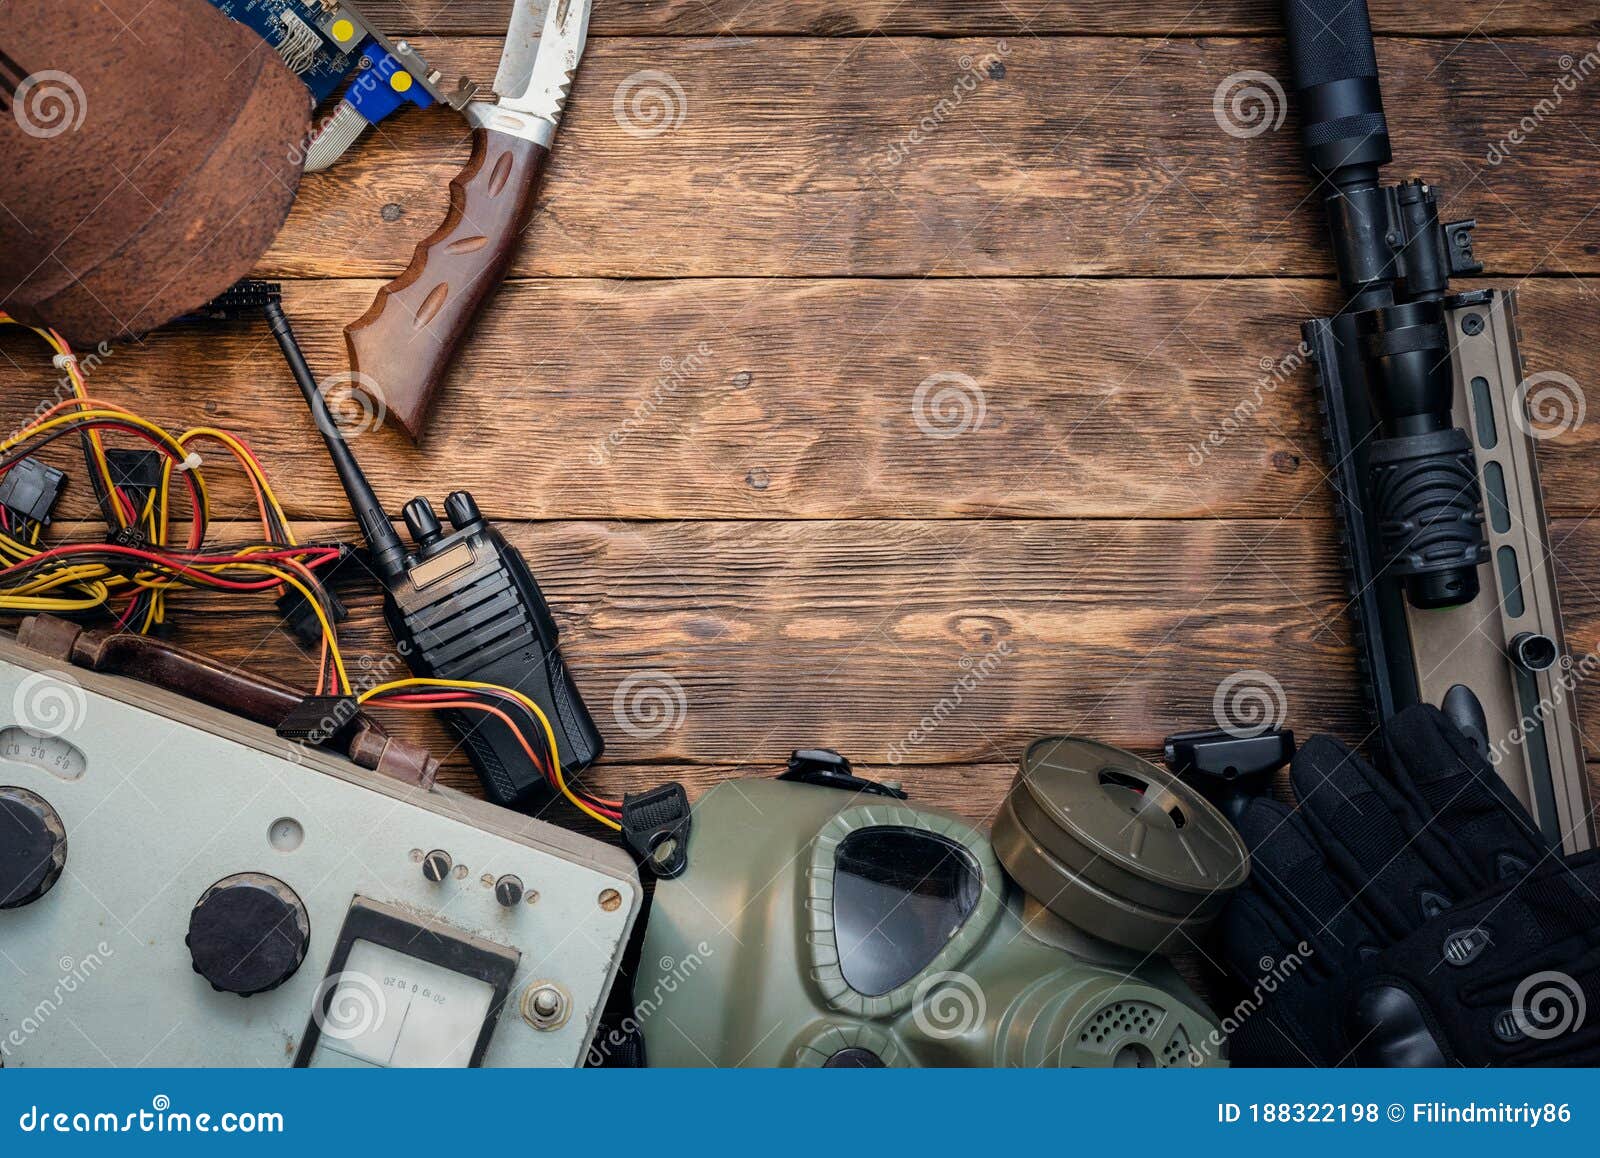 Post Apocalypse Soldier Equipment Stock Photo - Image of airsoft